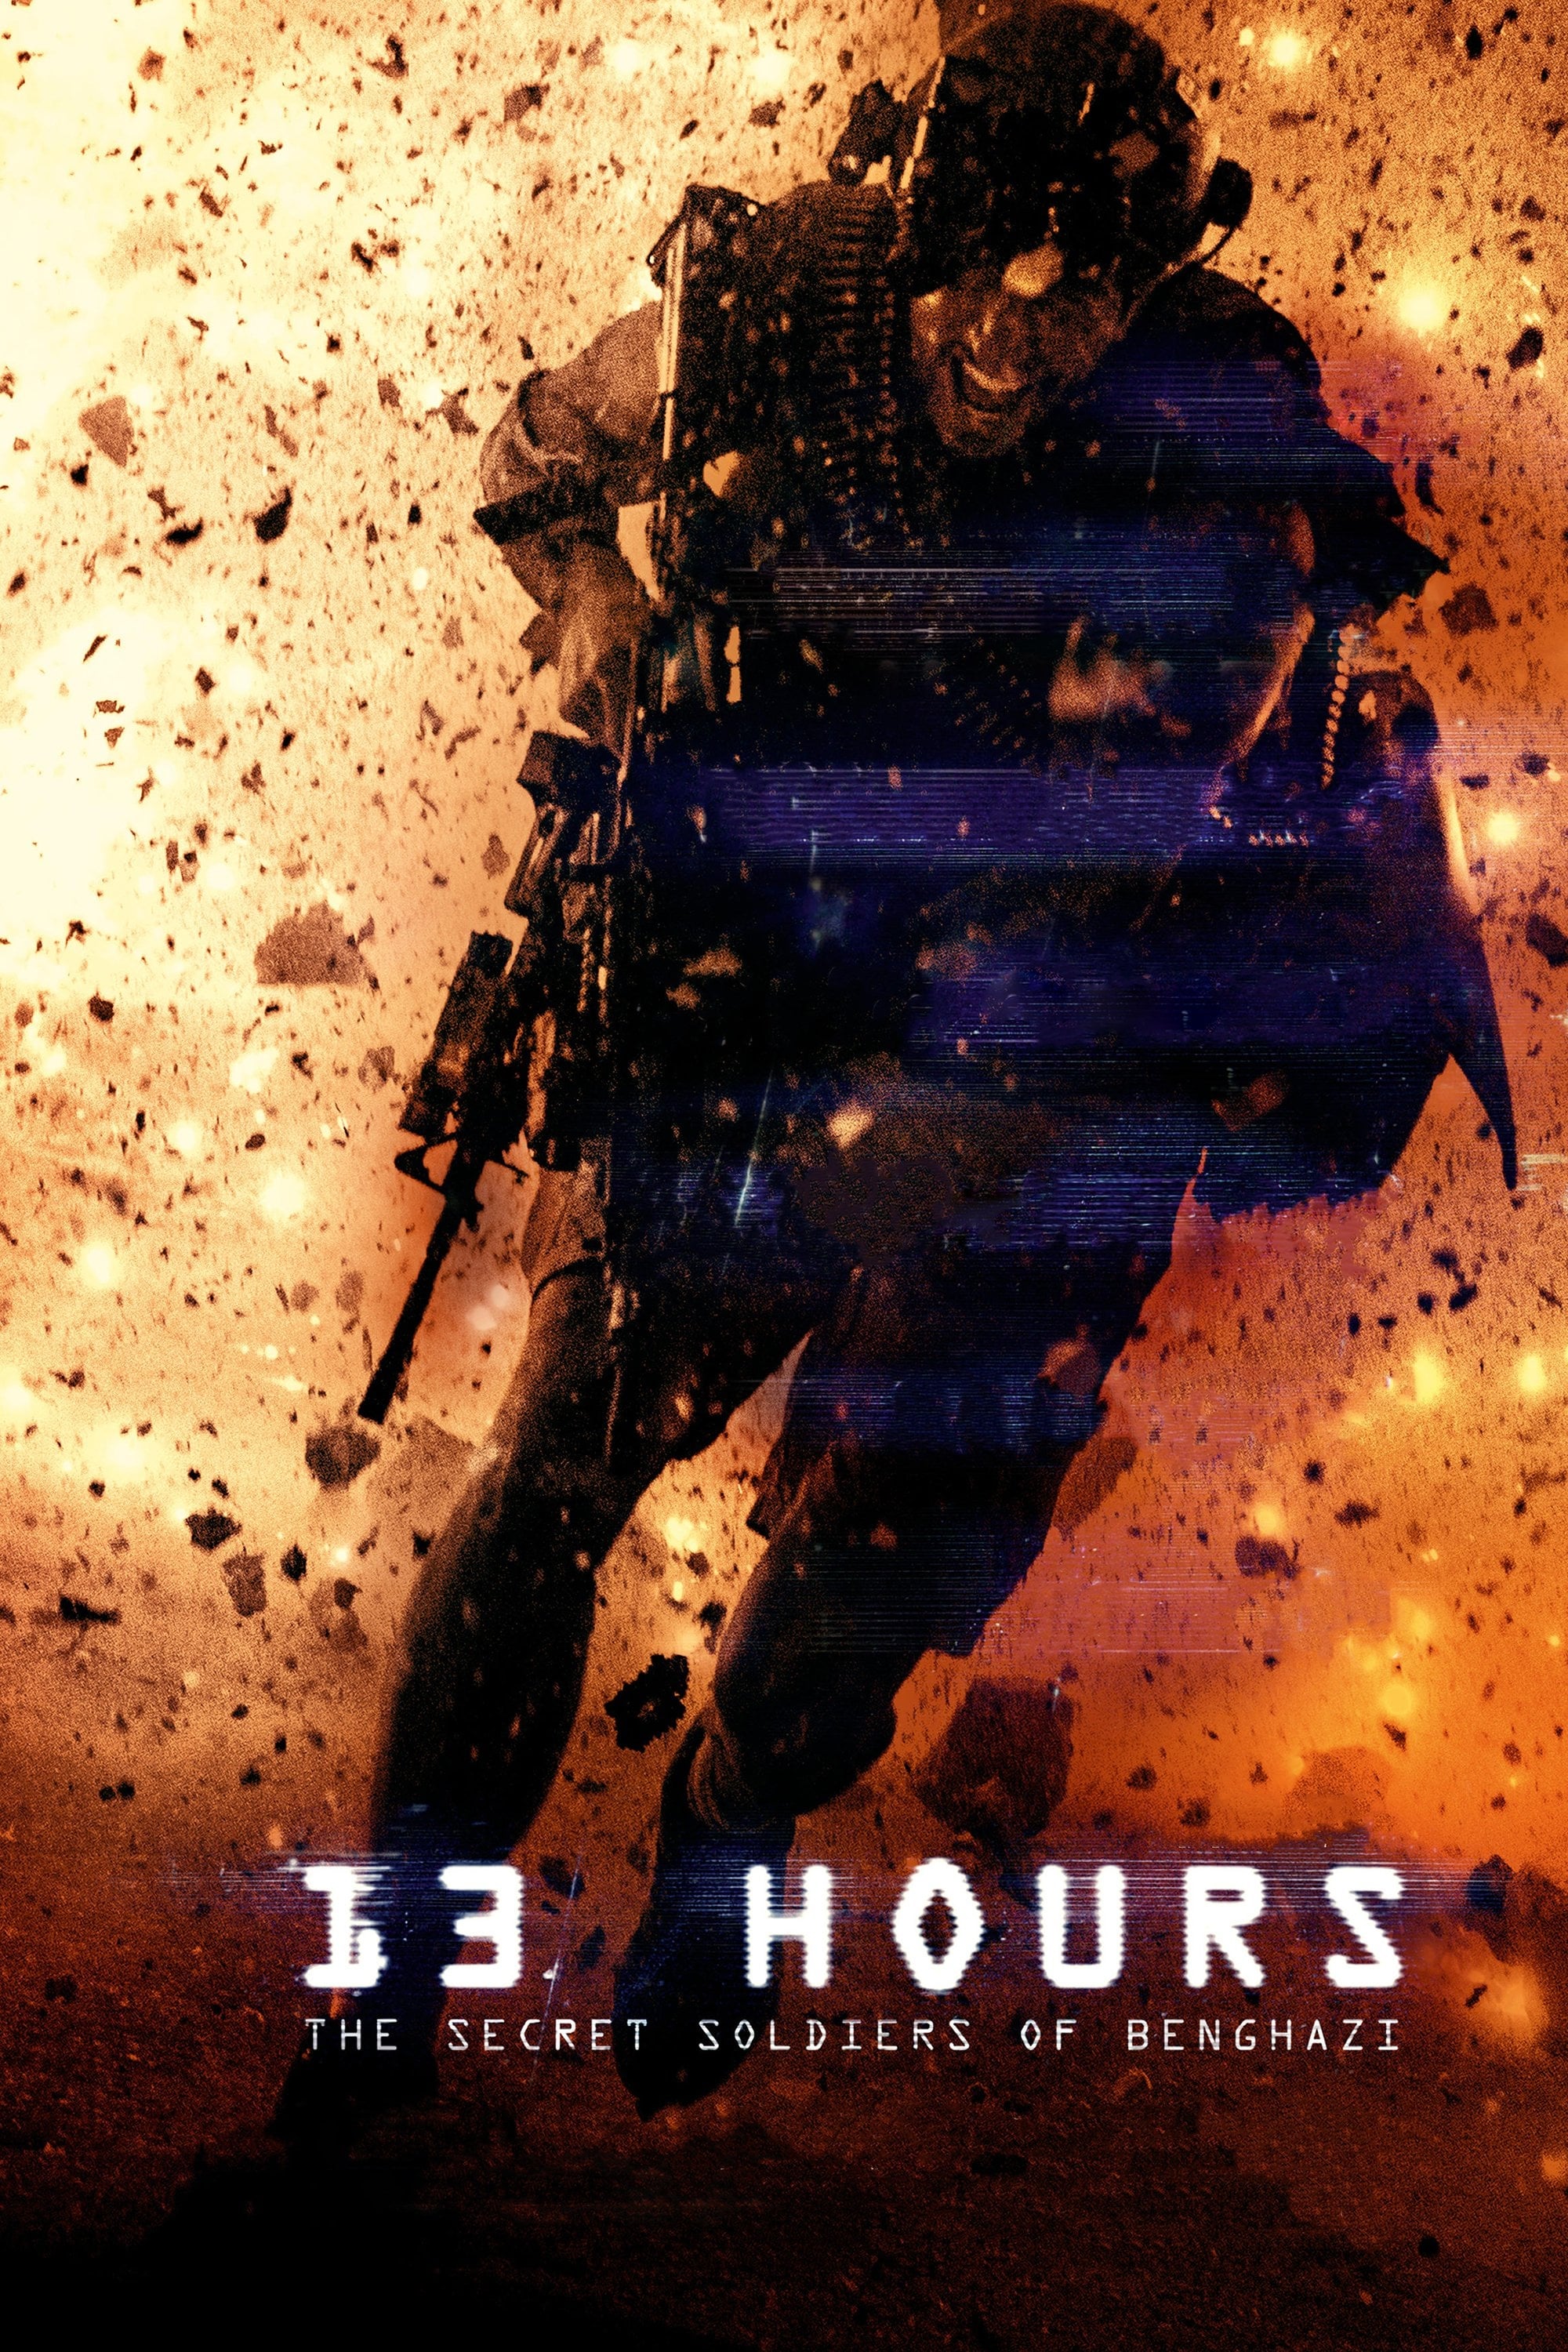 13 Hours The Secret Soldiers of Benghazi (2016) REMUX 4K HDR Latino – CMHDD